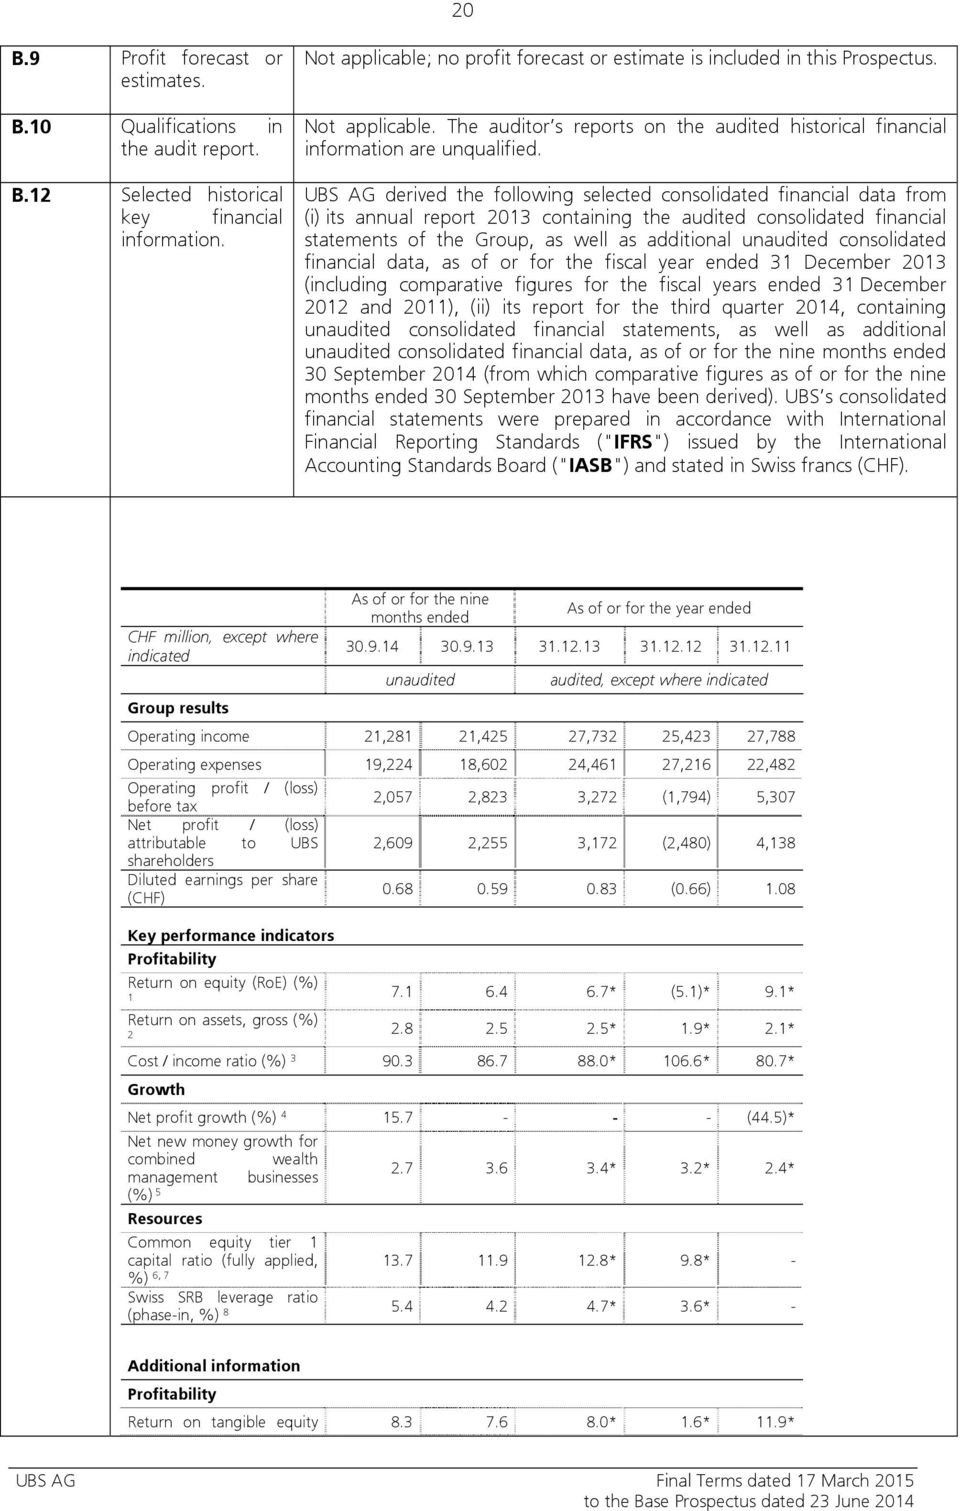 UBS AG derived the following selected consolidated financial data from (i) its annual report 2013 containing the audited consolidated financial statements of the Group, as well as additional